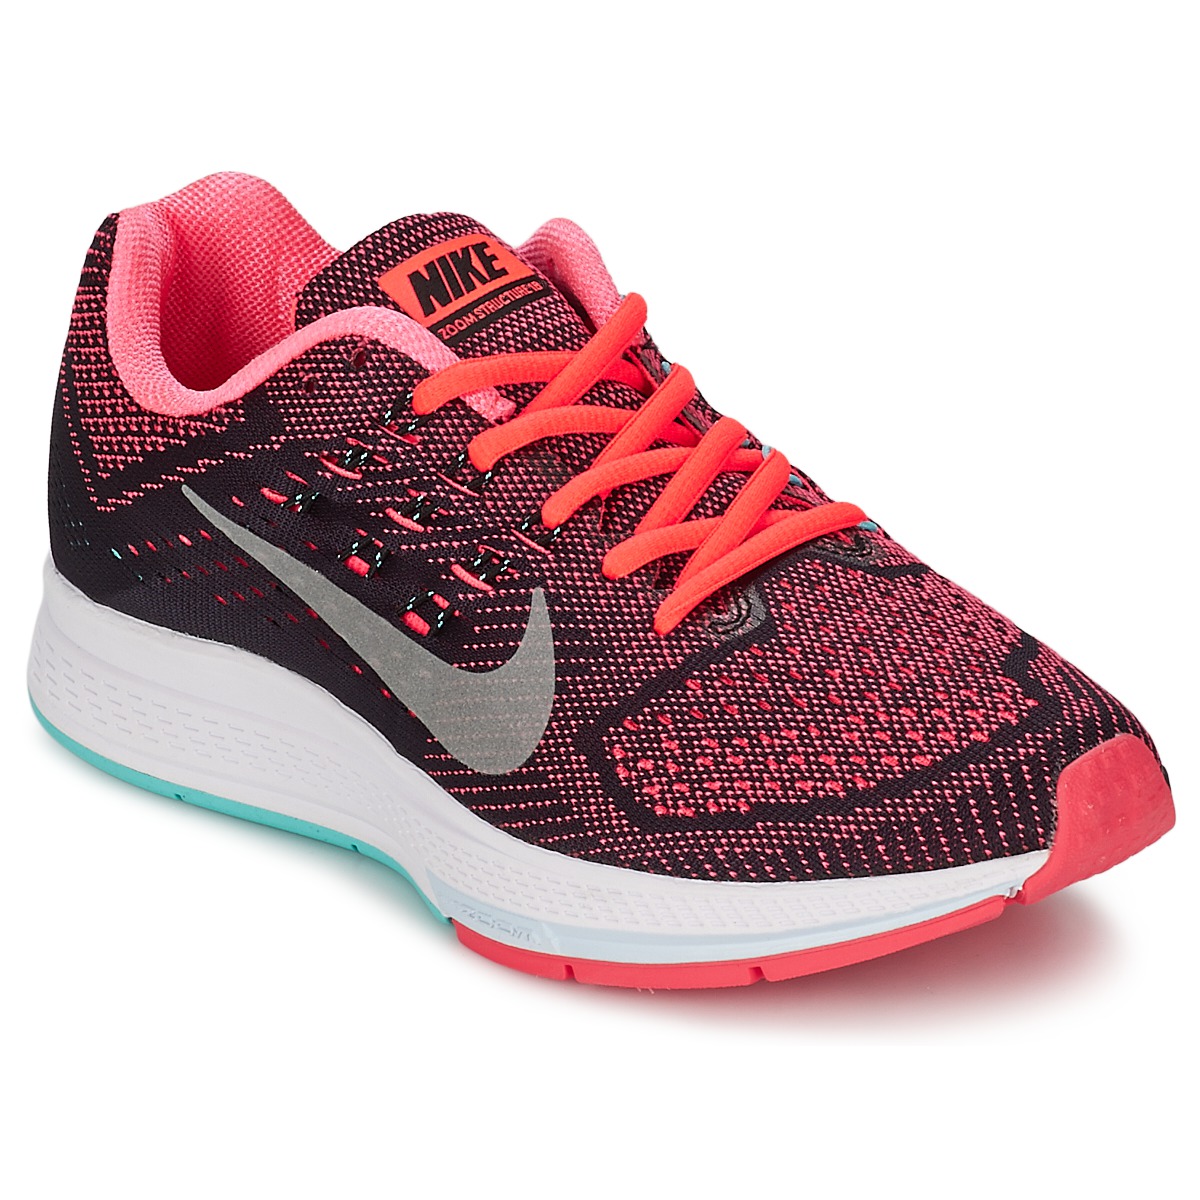 Chaussures de running Nike ZOOM STRUCTURE 18 Corail / Gris